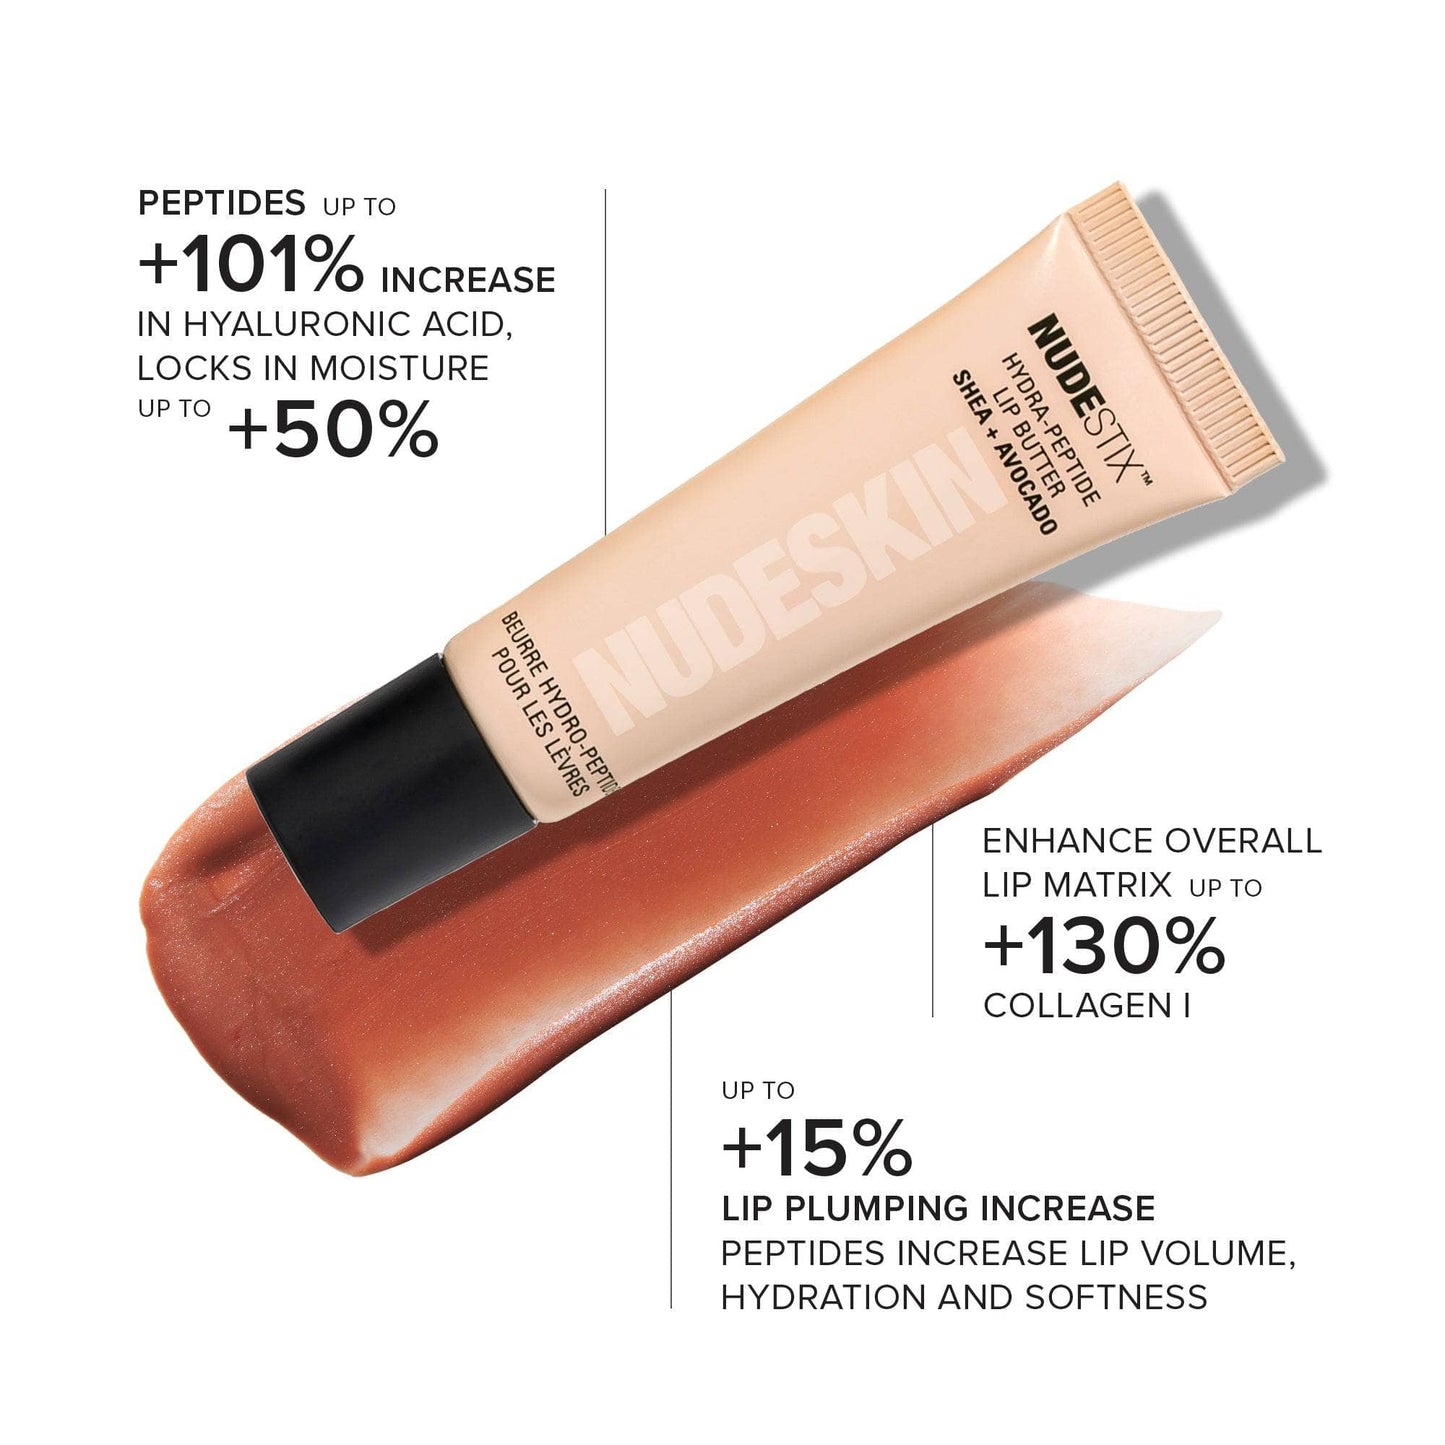 Hydra-Peptide Lip Butter in shade Dolce Nude with ingredient descriptions